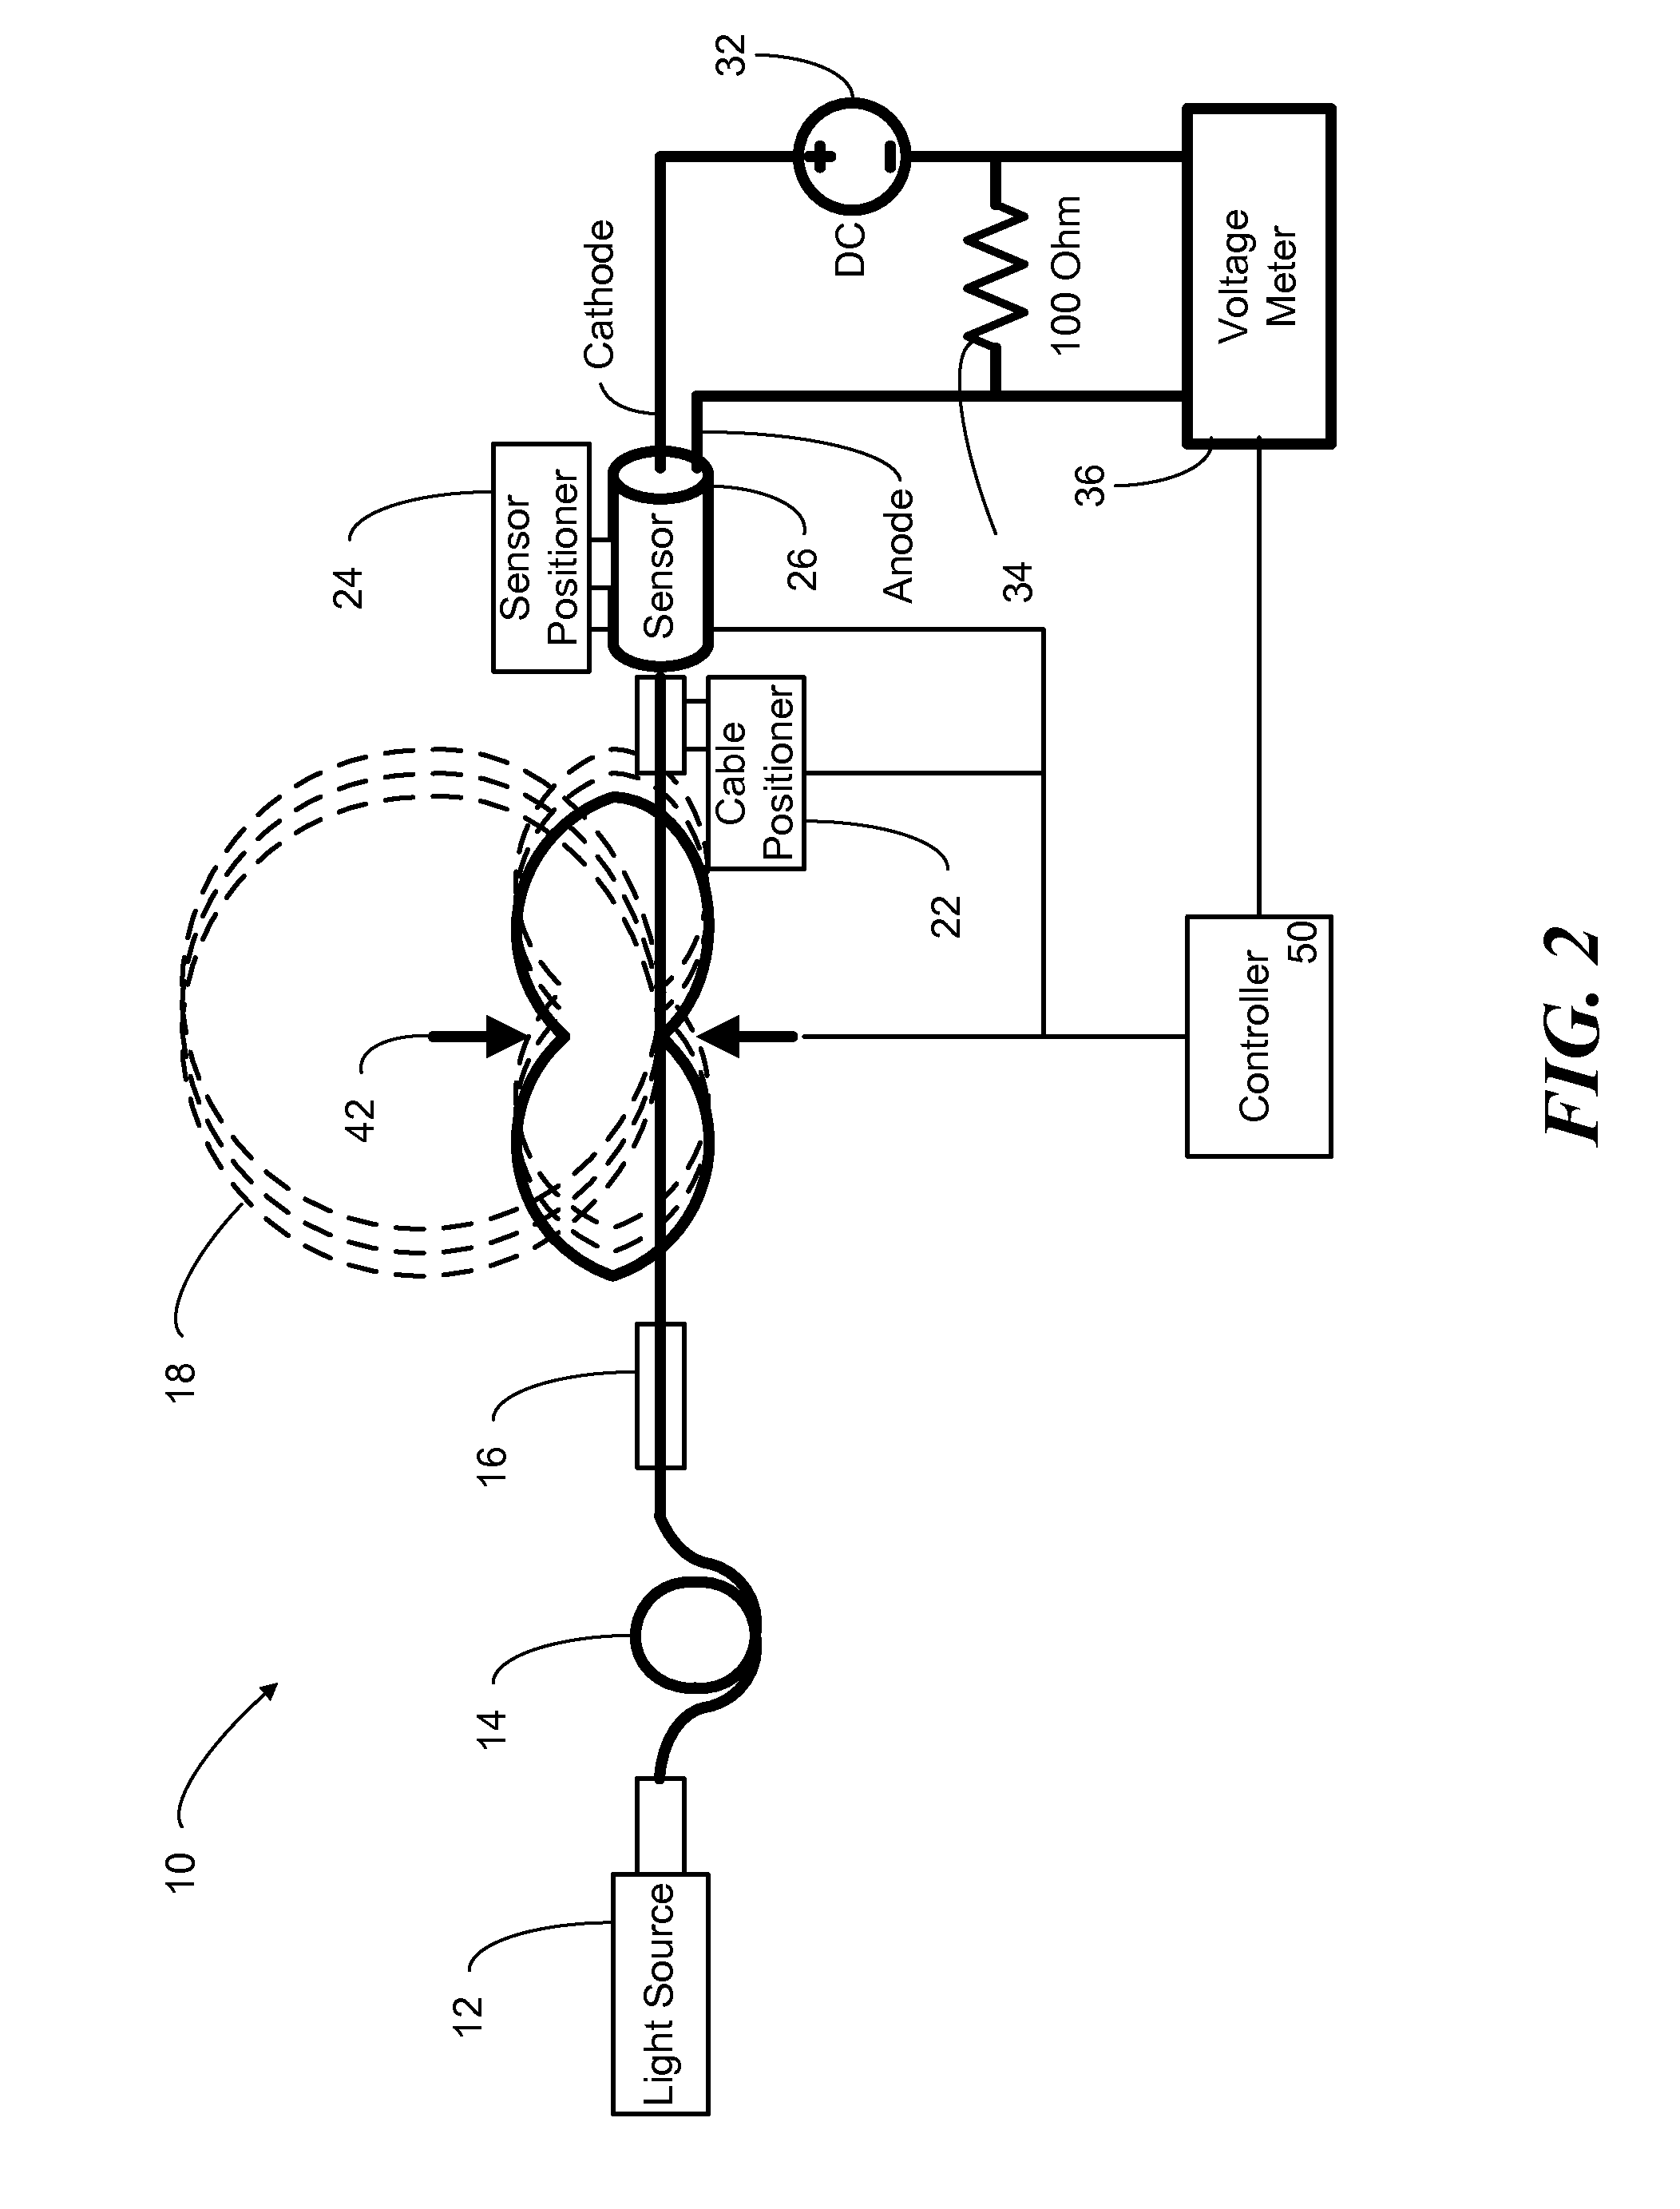 Method and system for coupling multimode optical fiber to an optical detector